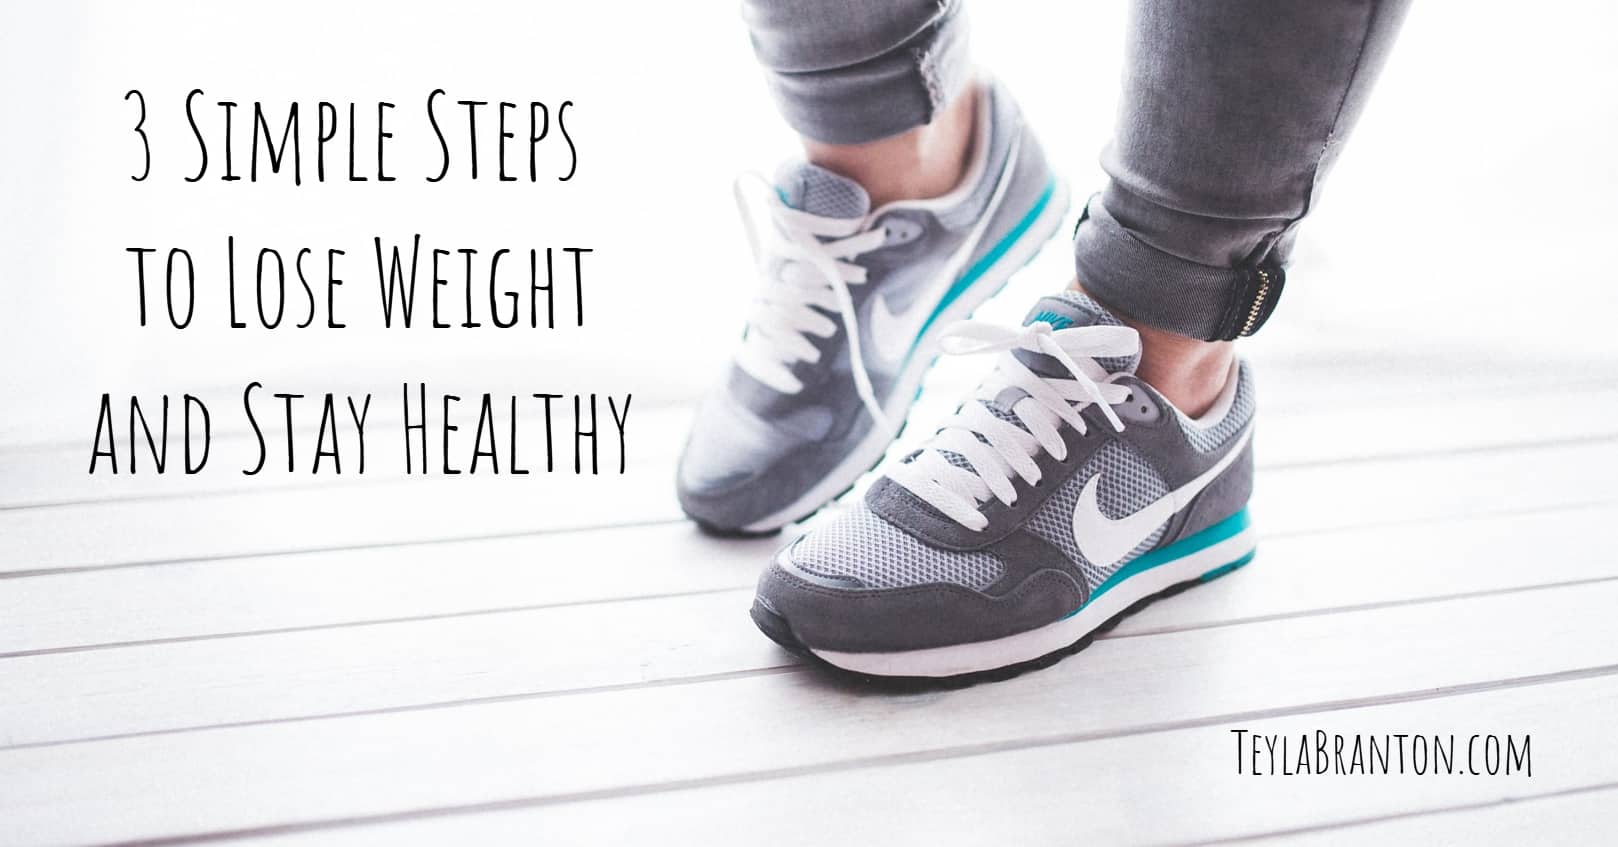 3 Simple Steps to Lose Weight and Stay Healthy